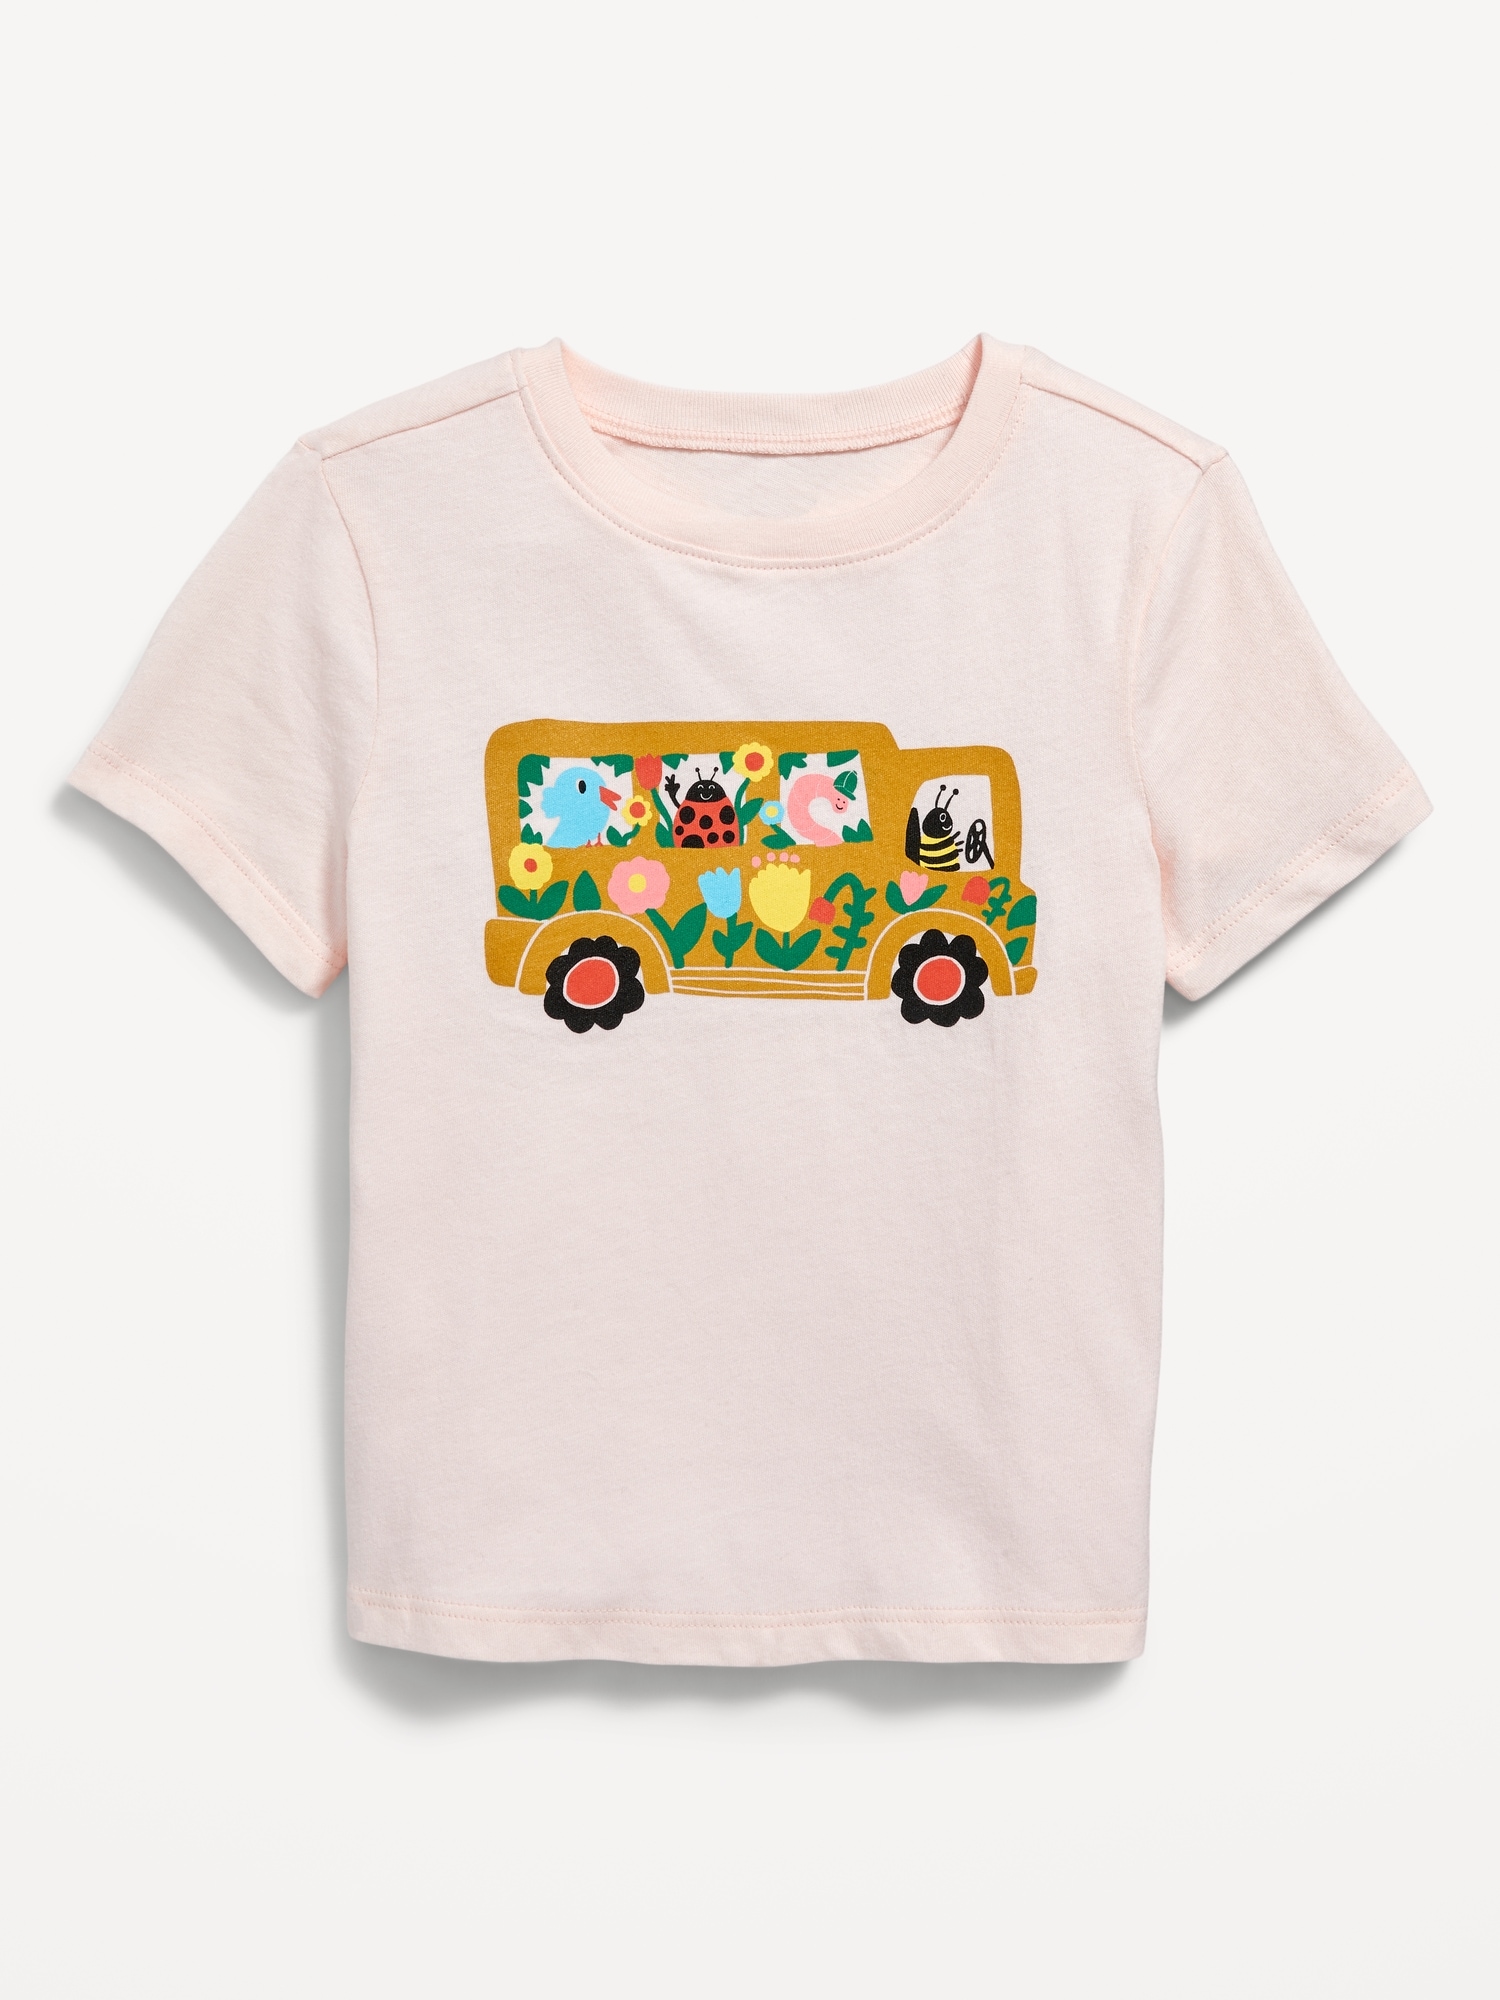 Baby Graphic Tees | Old Navy